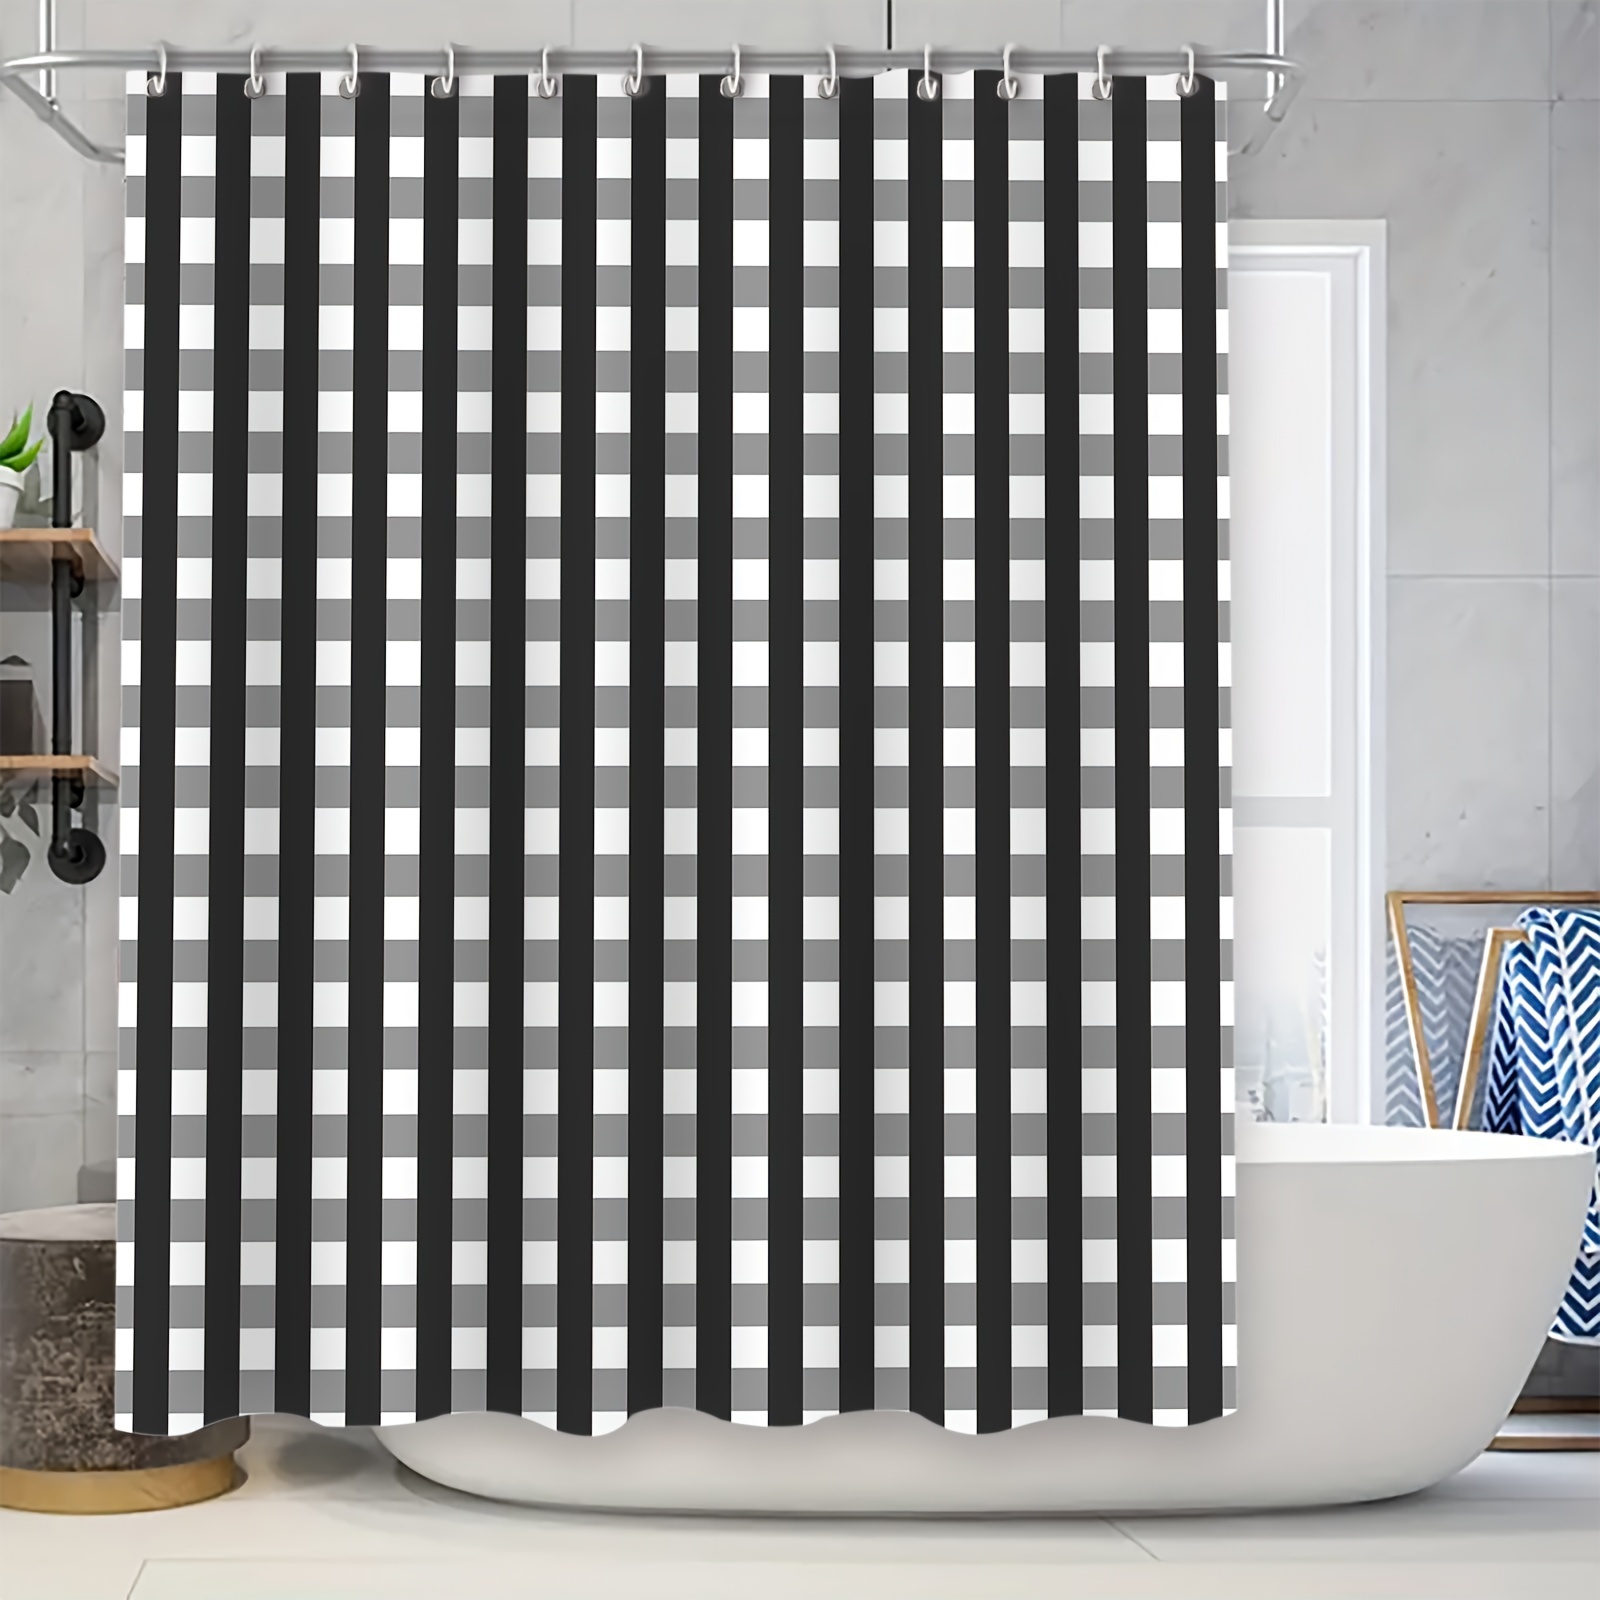 

1pc Black And Grey Plaid Shower Curtain Set, Fashionable Bathroom Partition Curtain With 12 Hanging Rings, Waterproof And Mildew Resistant, Home Bathroom Bathtub Decor, 70.8"x70.8" Window Curtain